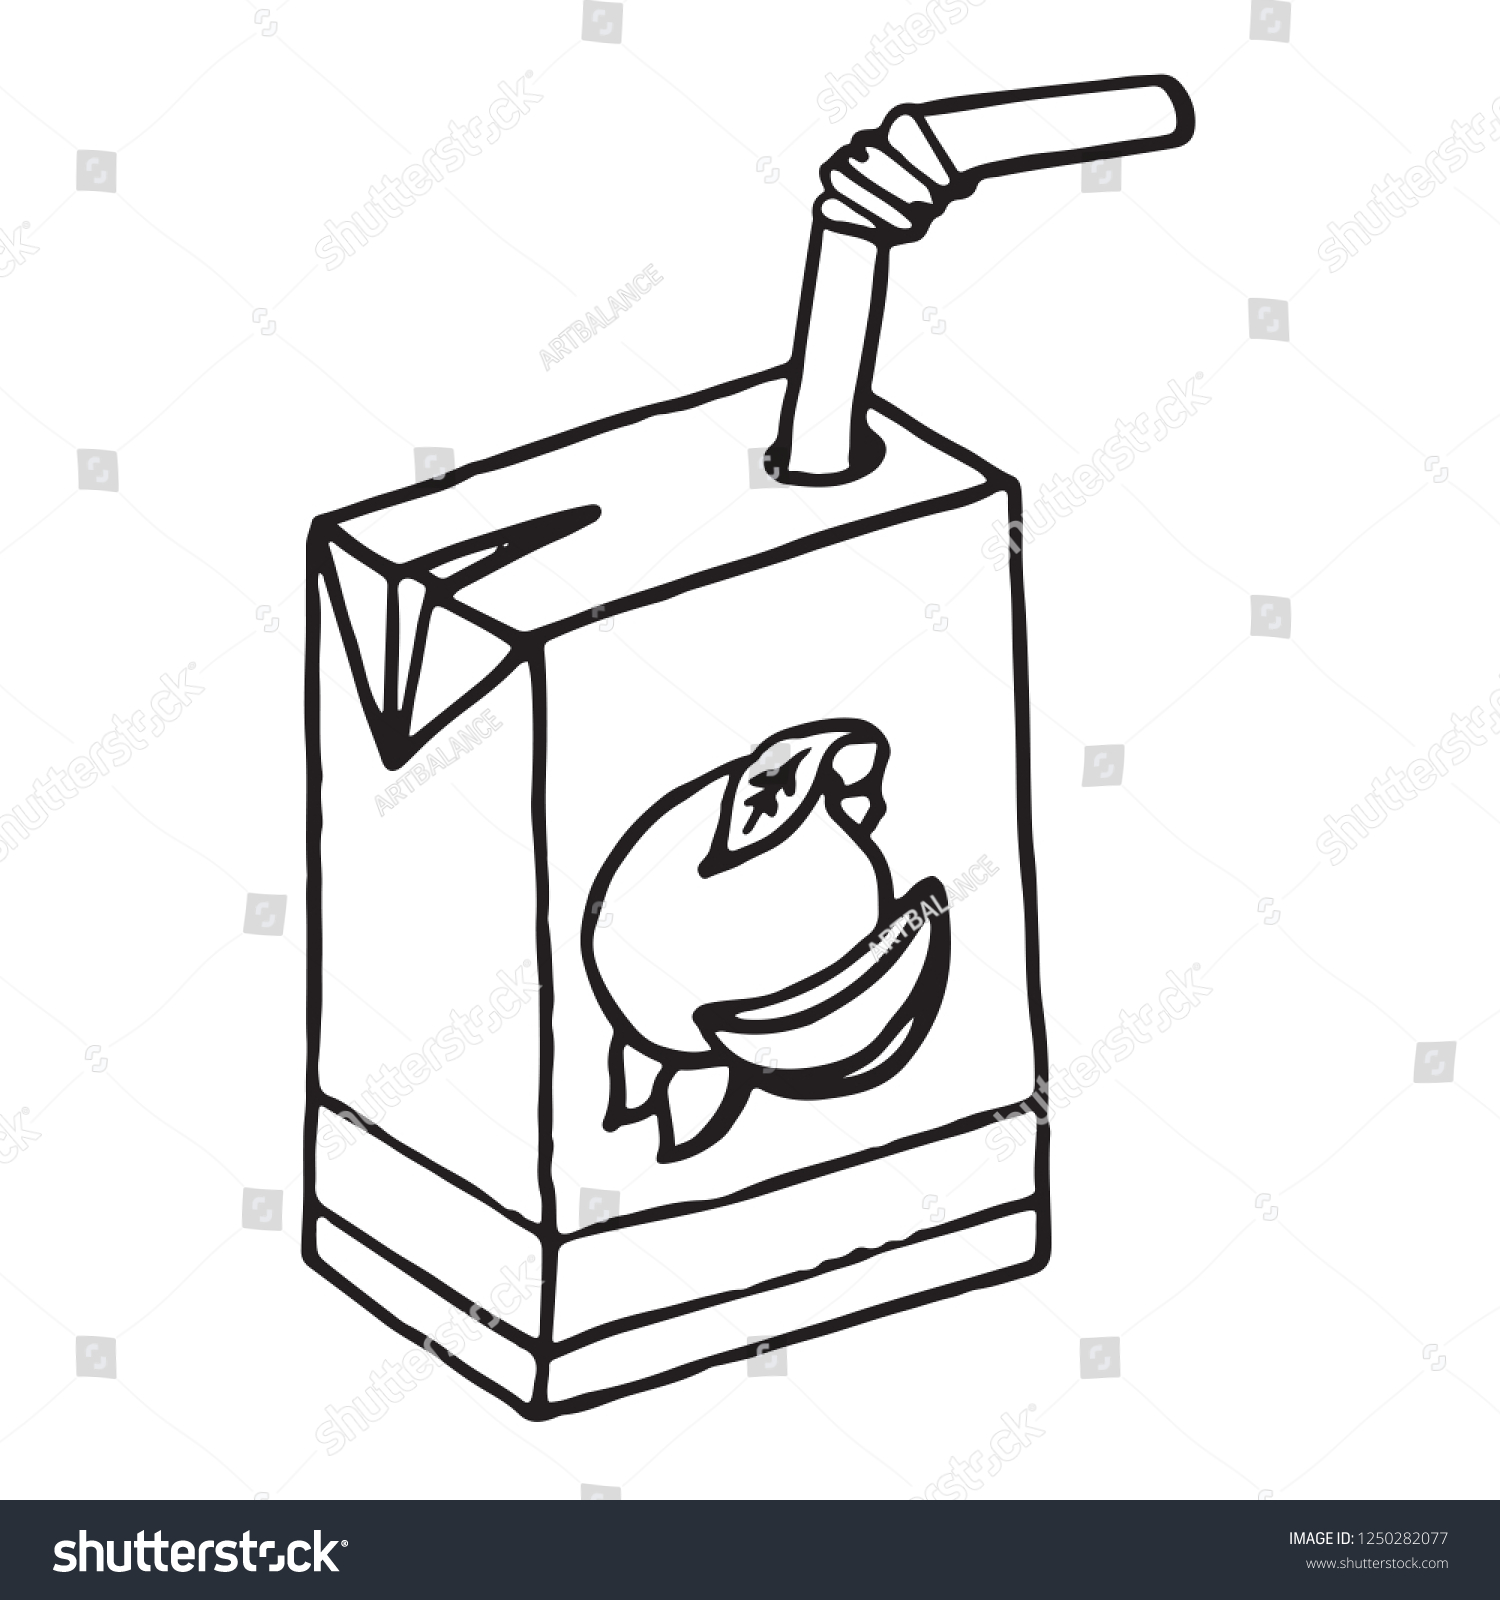 SVG of Juice icon. Vector illustration of a pack of juice with a straw. Hand drawn packaging juice with a straw svg